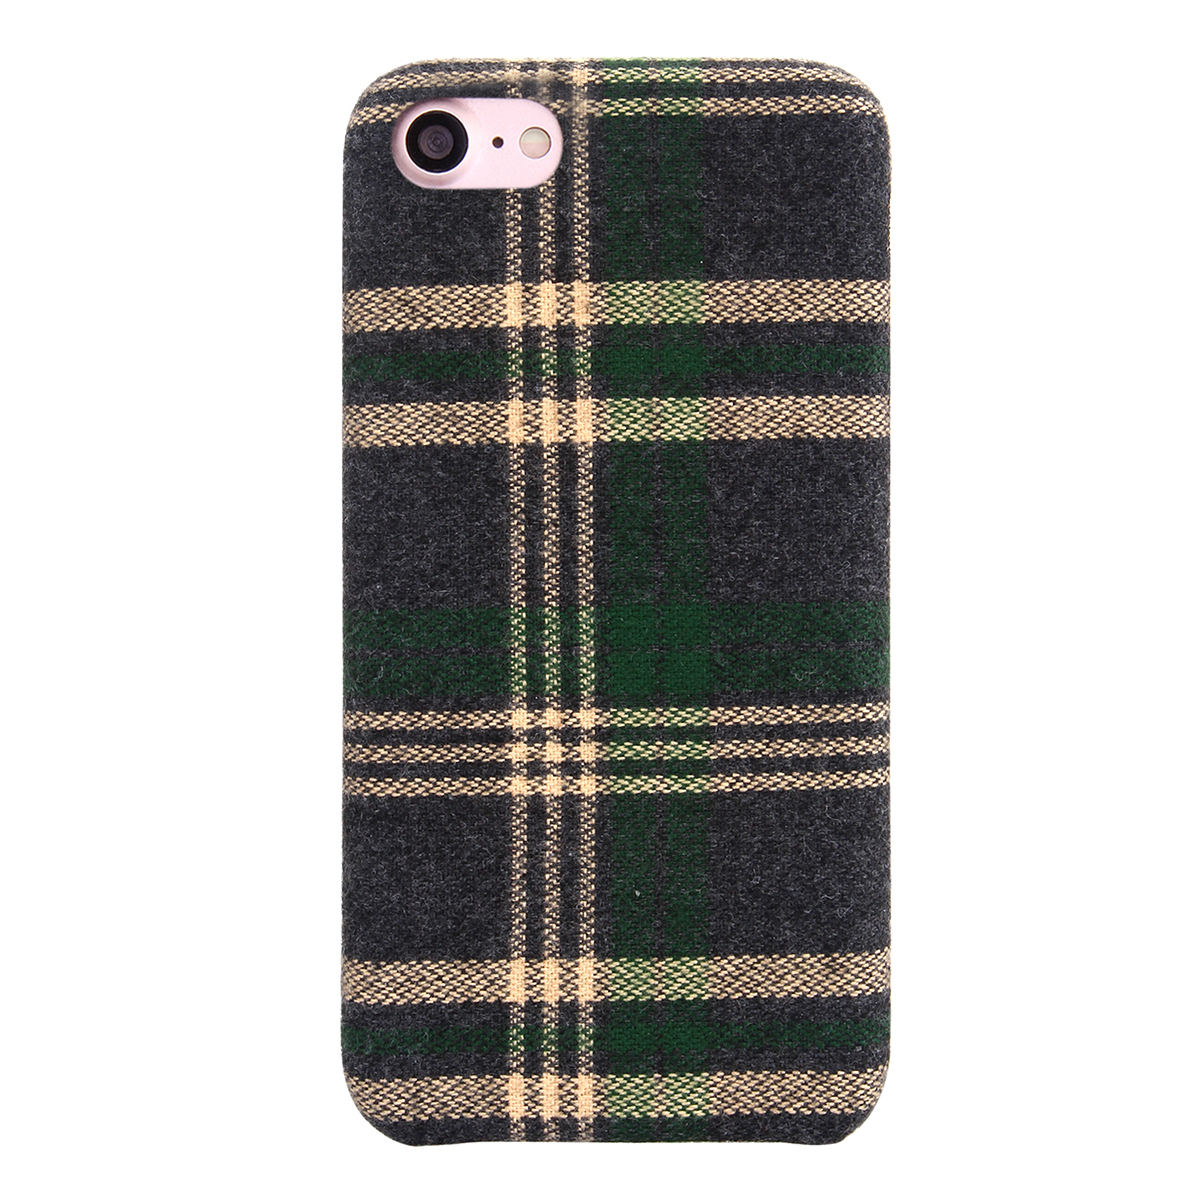 England Grid PC Slim Hard Cellphone Case for iPhone 7 - Green